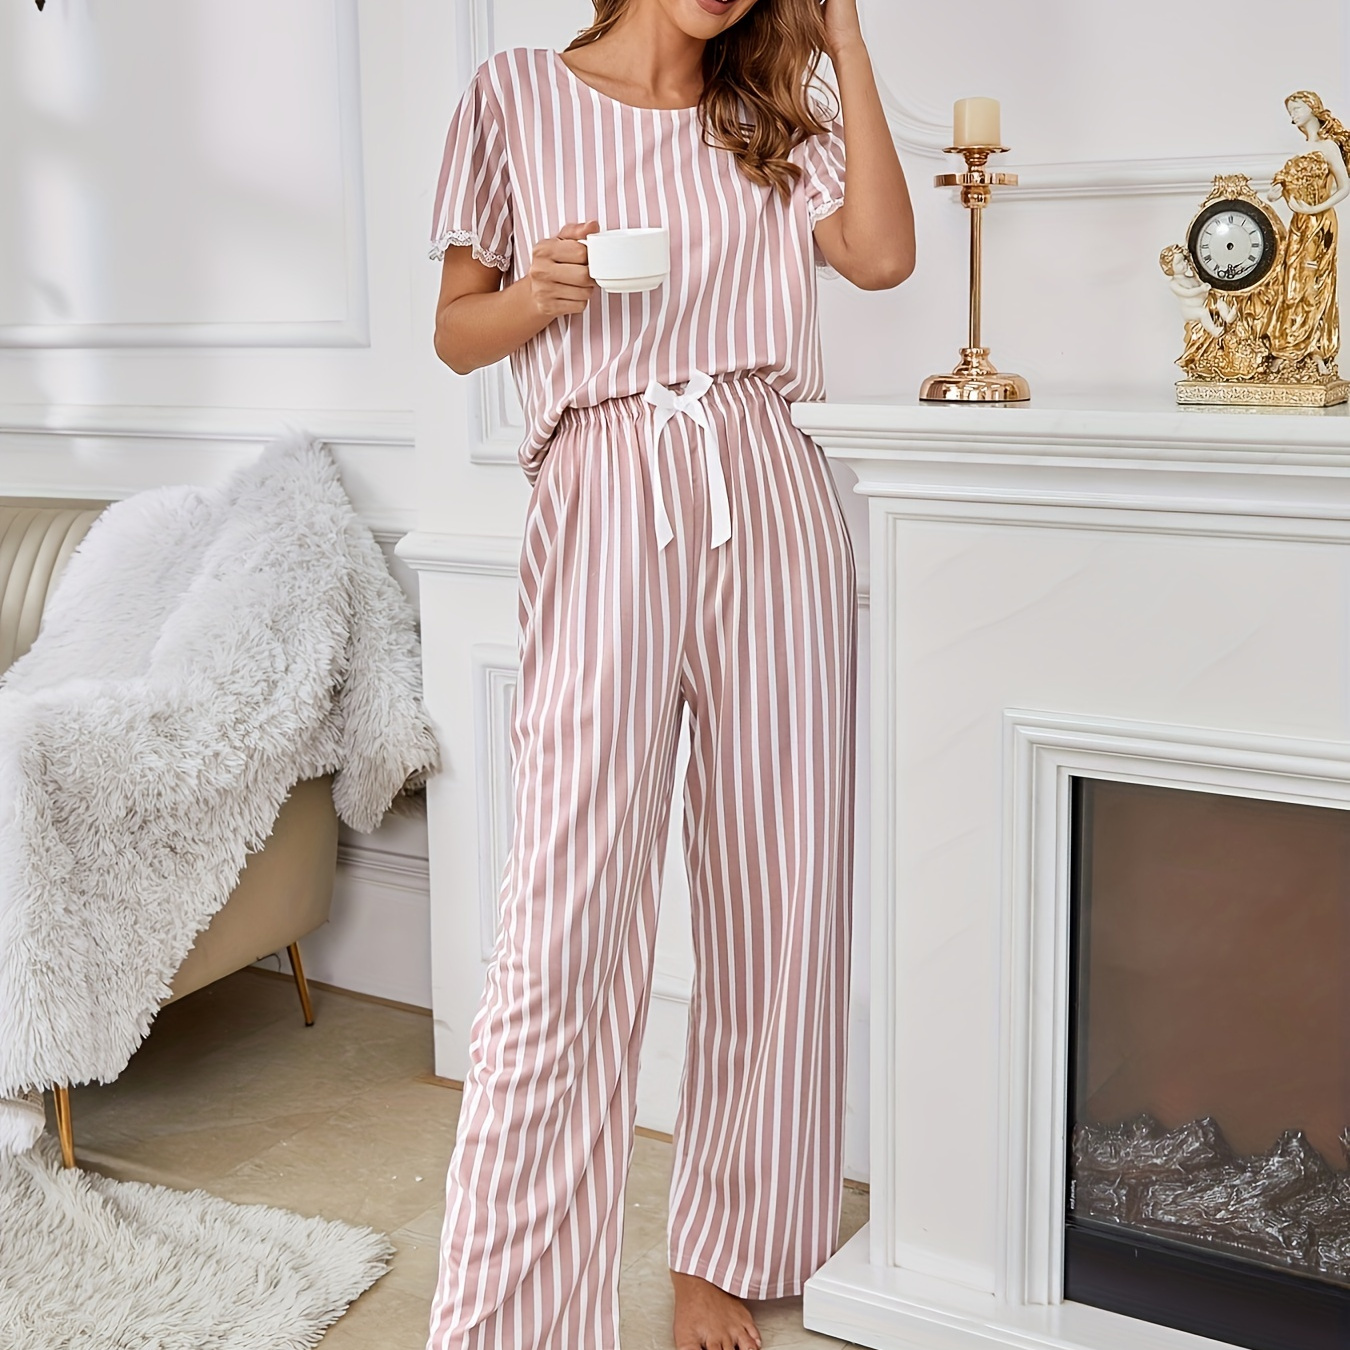 

Women's Stripe Print Casual Pajama Set, Lace Trim Short Sleeve Round Neck Top & Pants, Comfortable Relaxed Fit